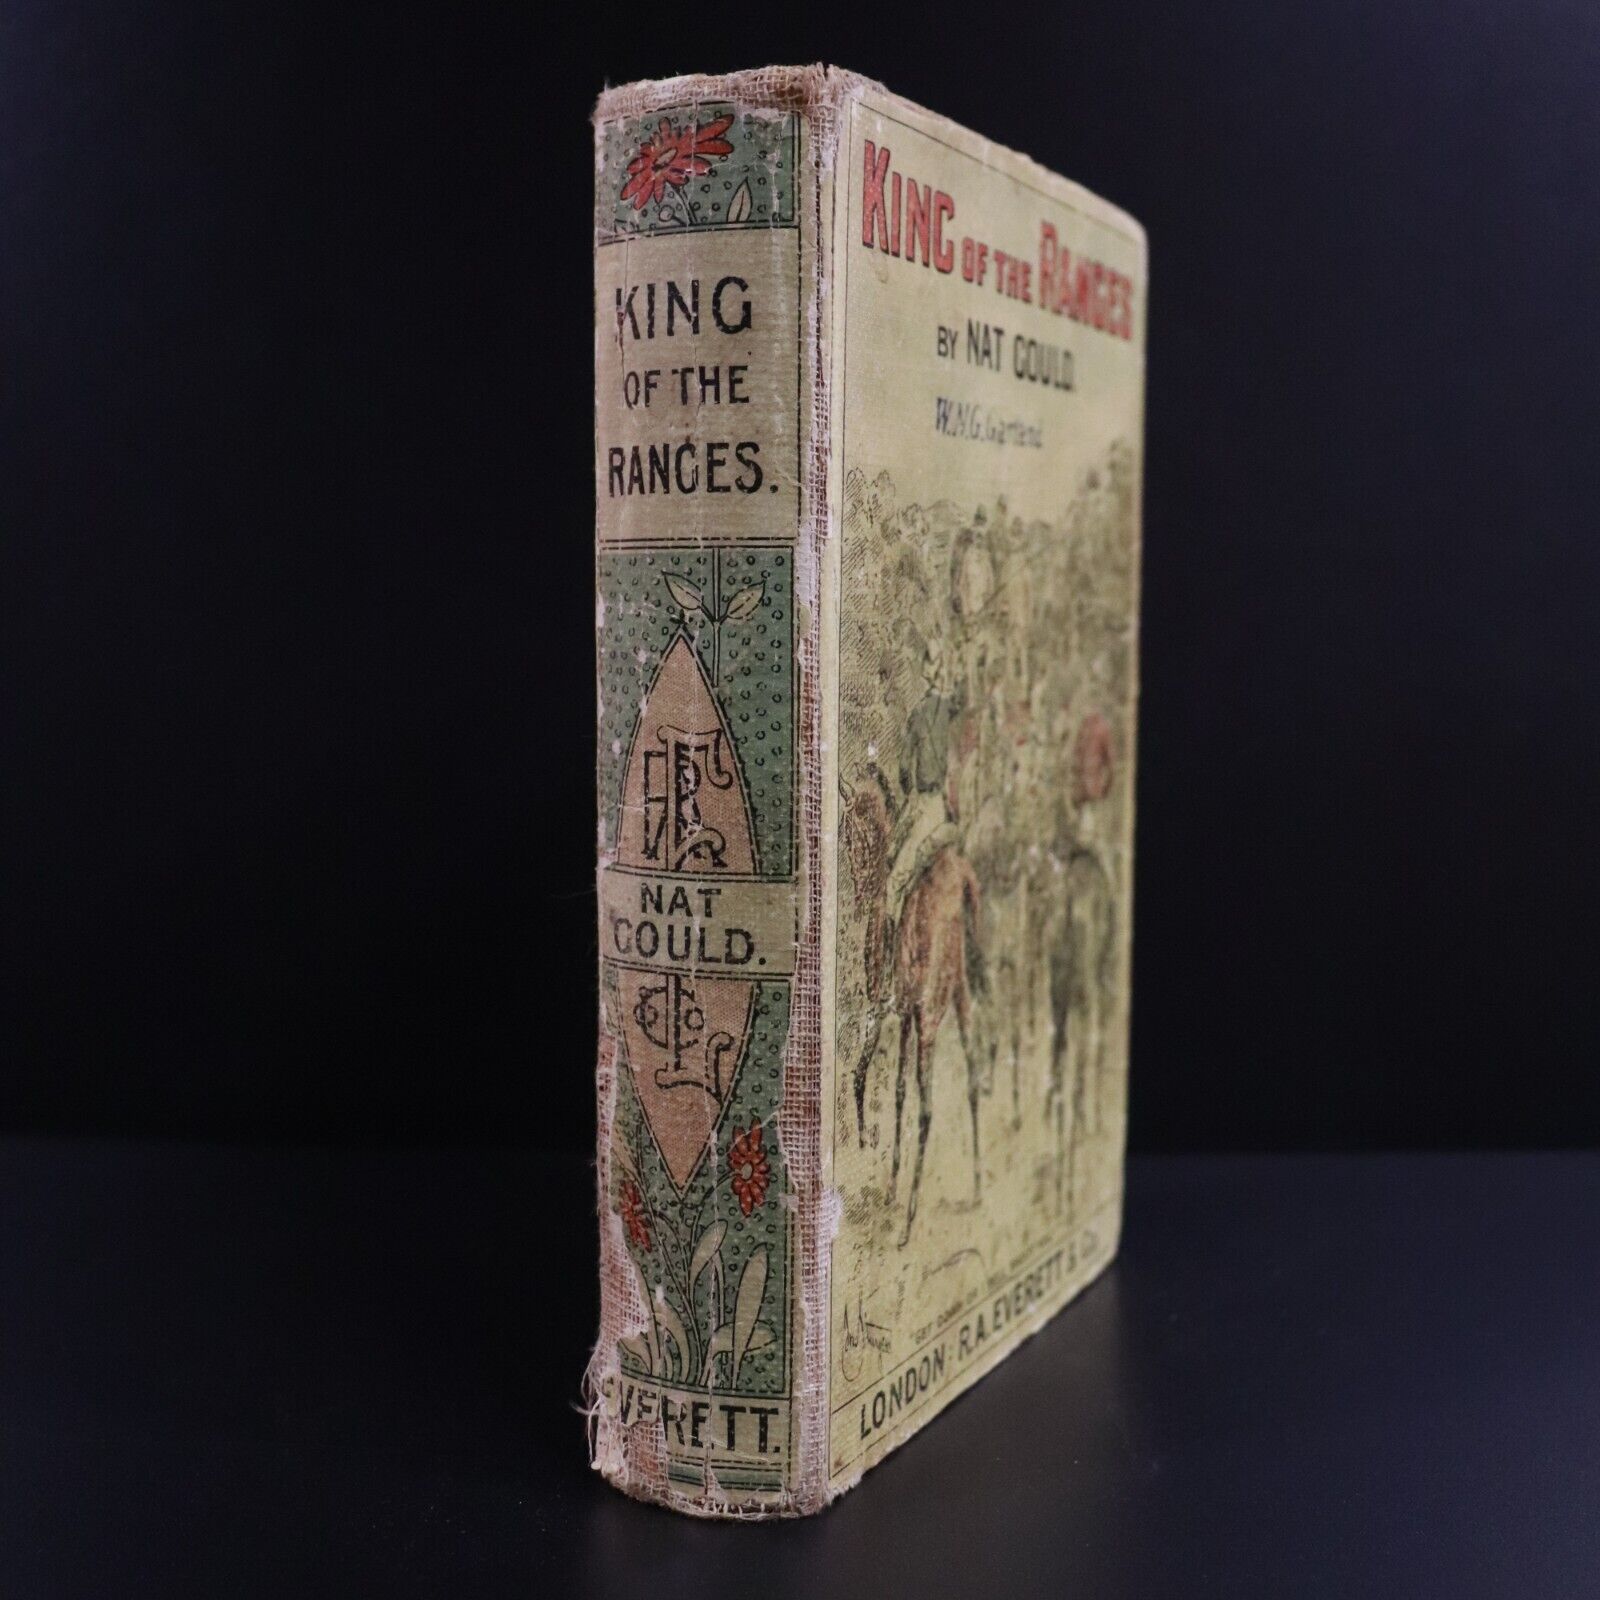 1902 King Of The Ranges by Nat Gould 1st Edition Antique Australian Fiction Book